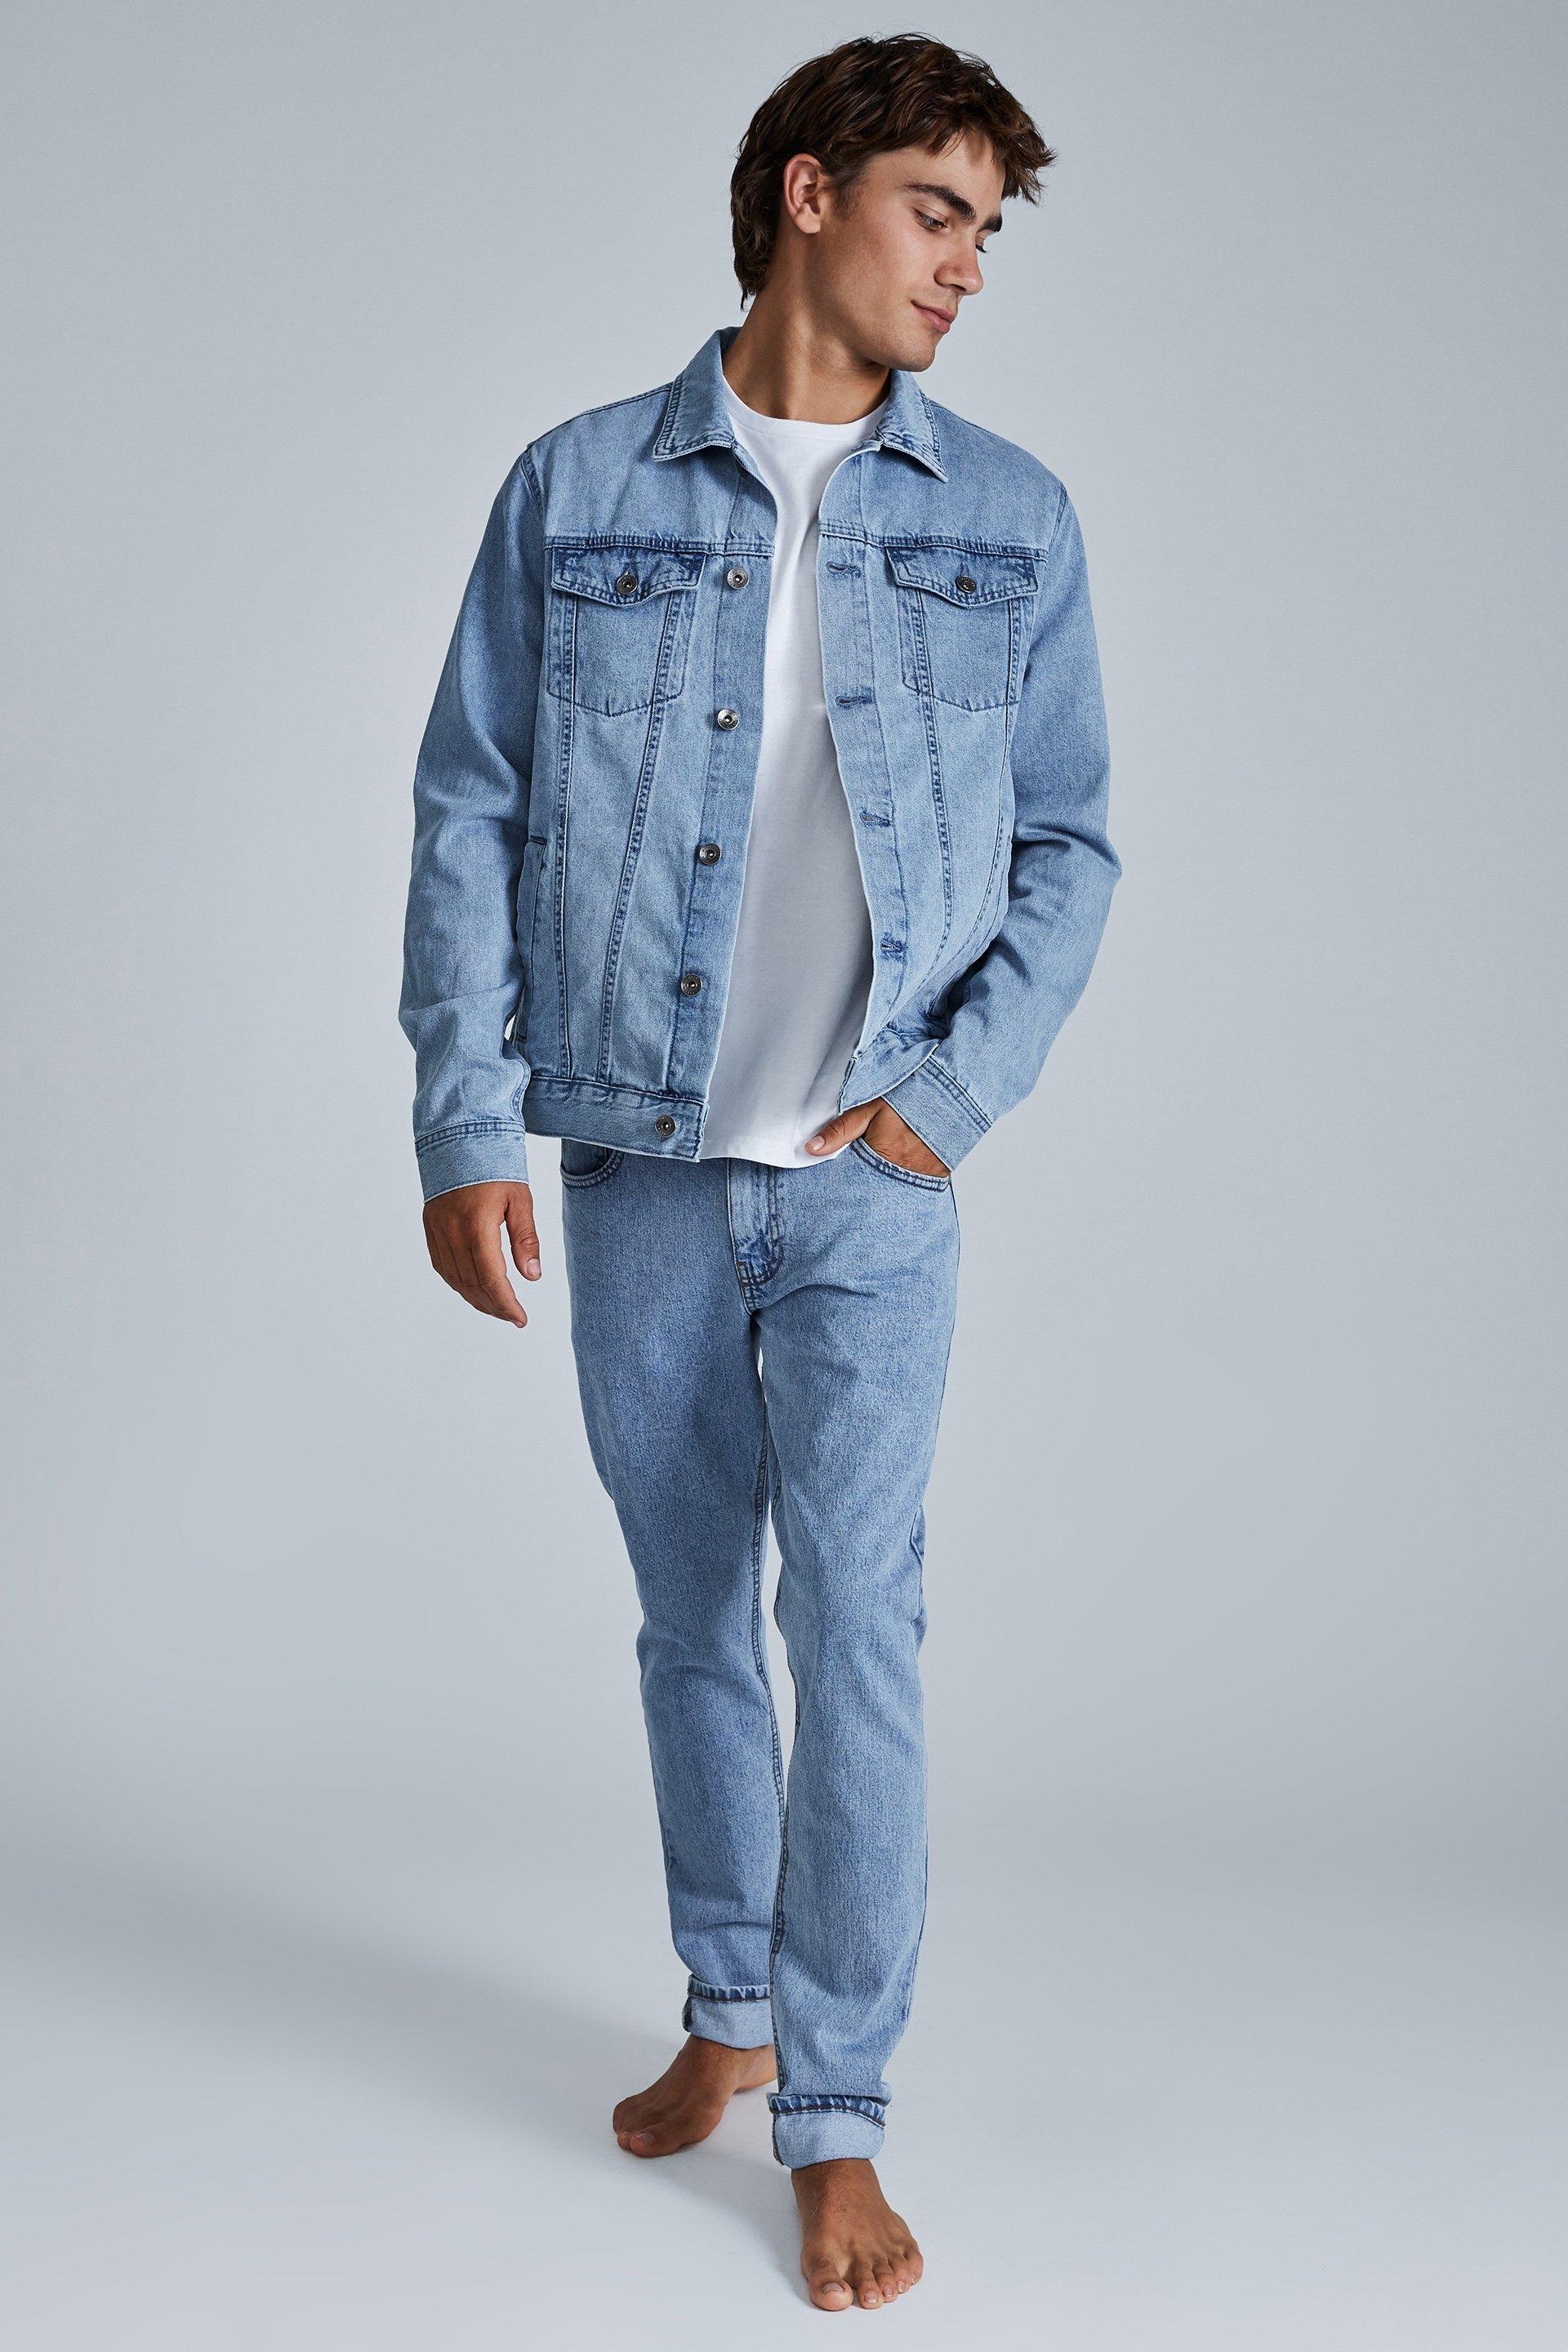 Rodeo jacket - weekday blue Cotton On Jackets | Superbalist.com